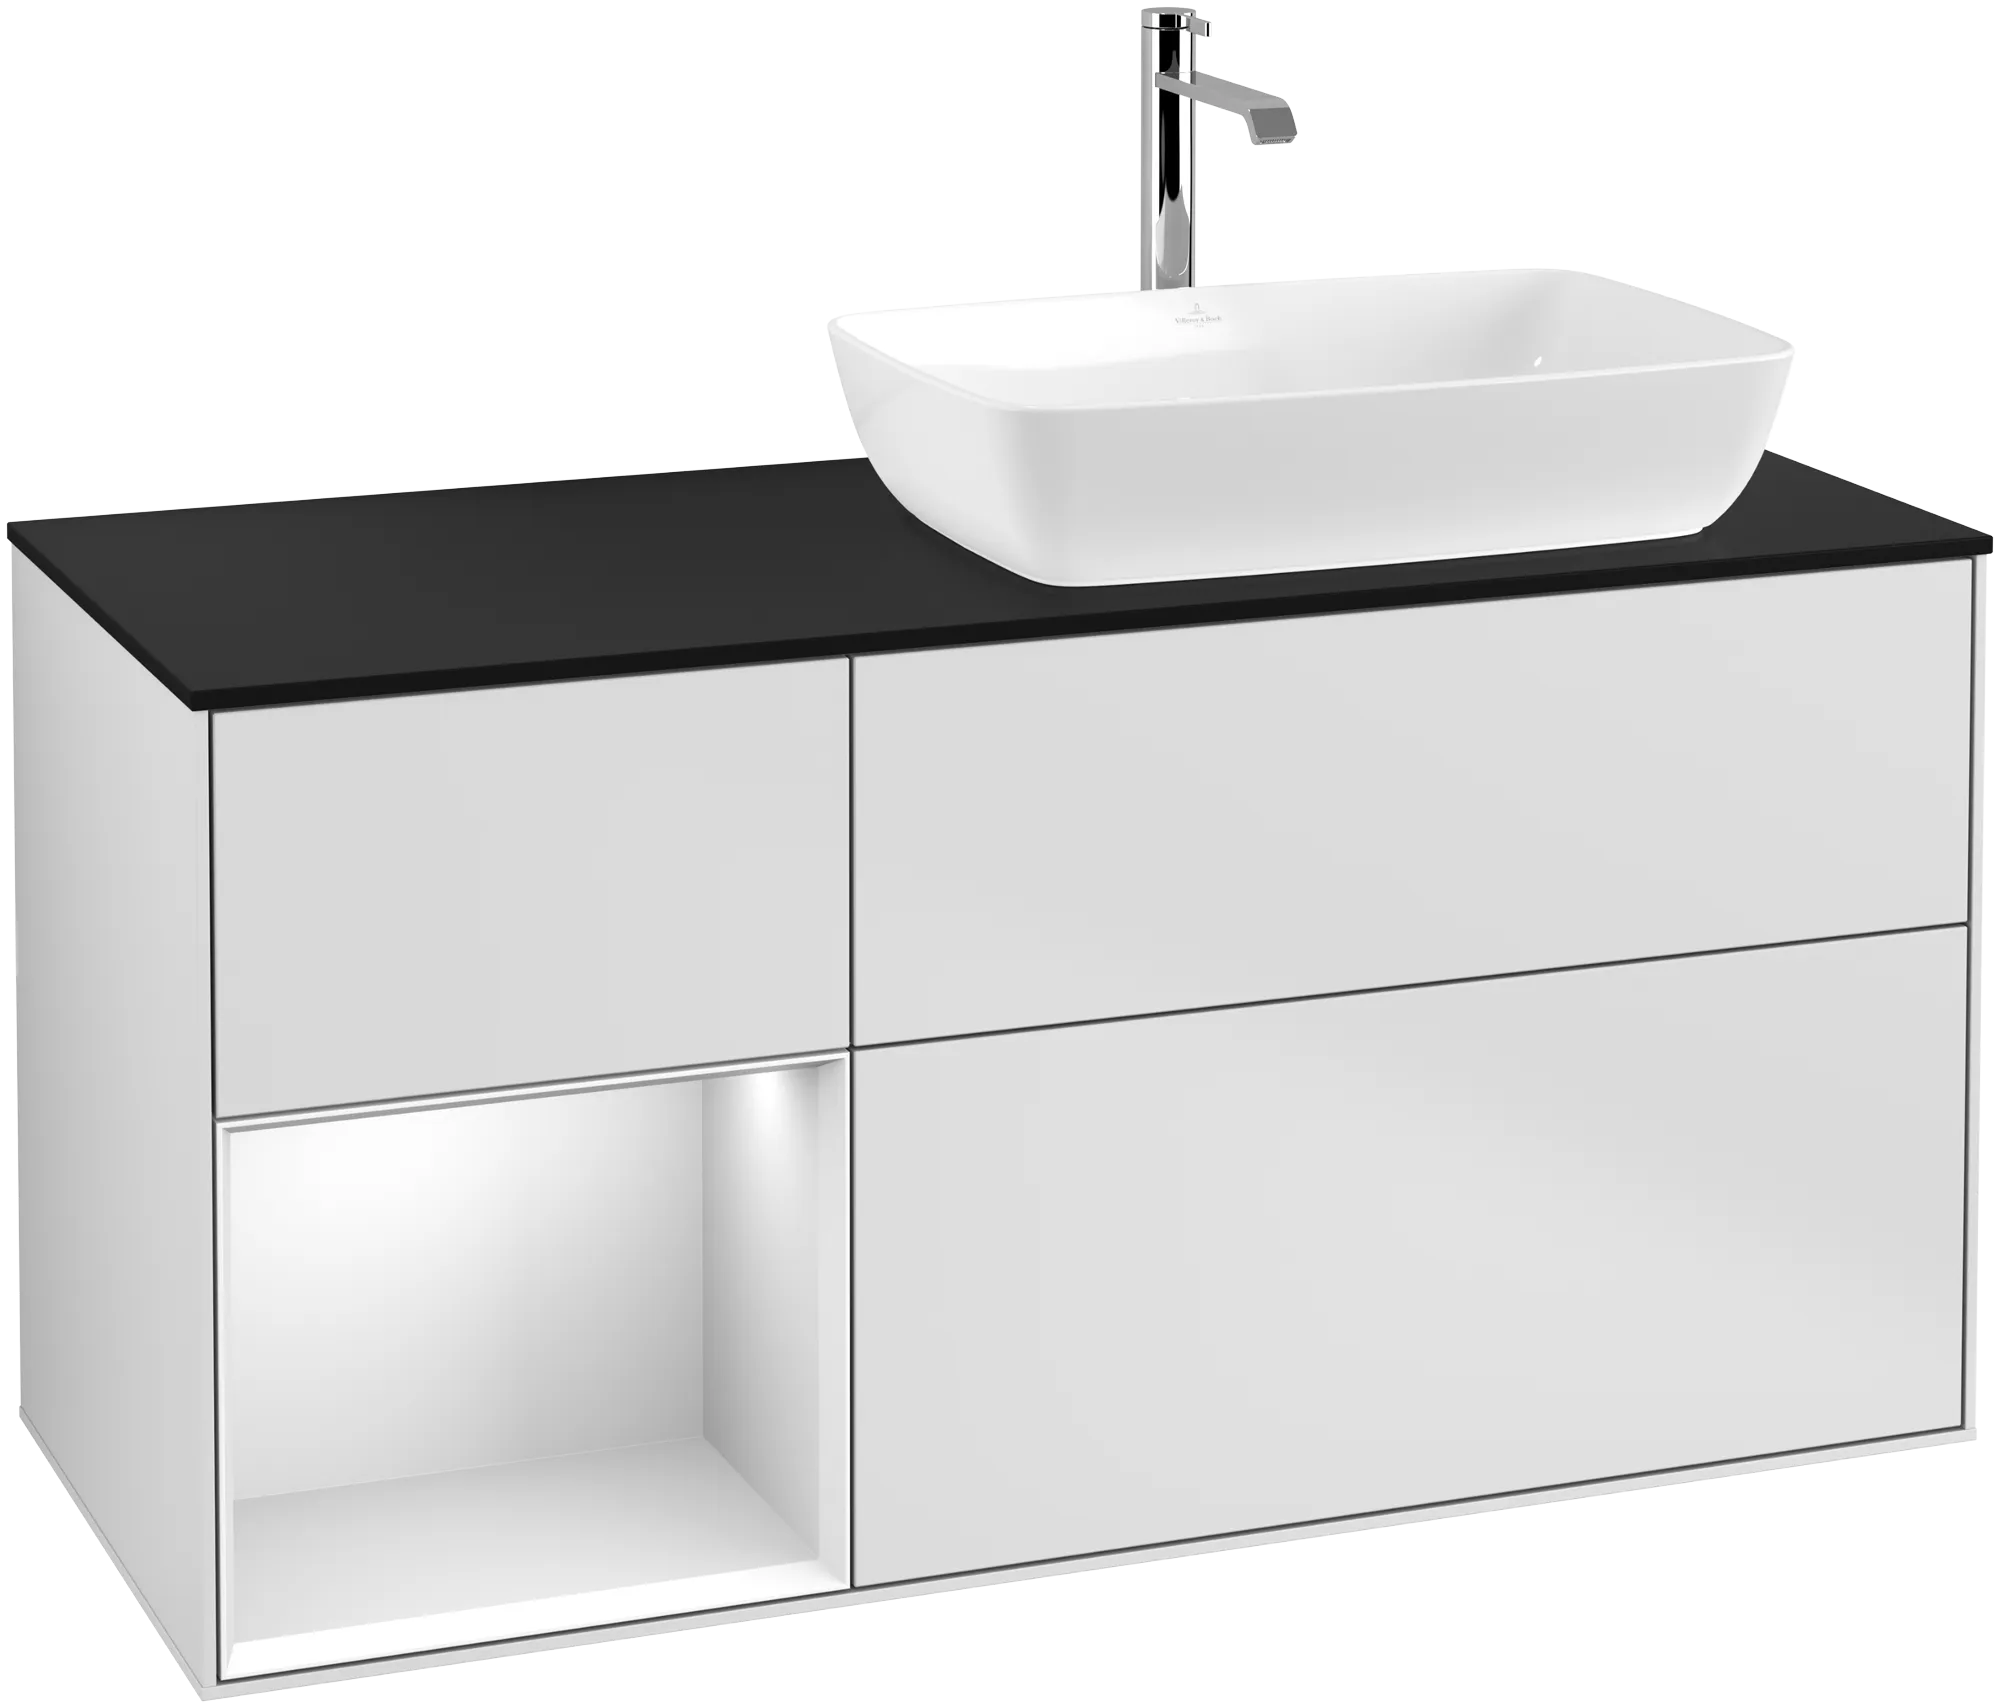 Obrázek VILLEROY BOCH Finion Vanity unit, with lighting, 3 pull-out compartments, 1200 x 603 x 501 mm, White Matt Lacquer / White Matt Lacquer / Glass Black Matt #G802MTMT